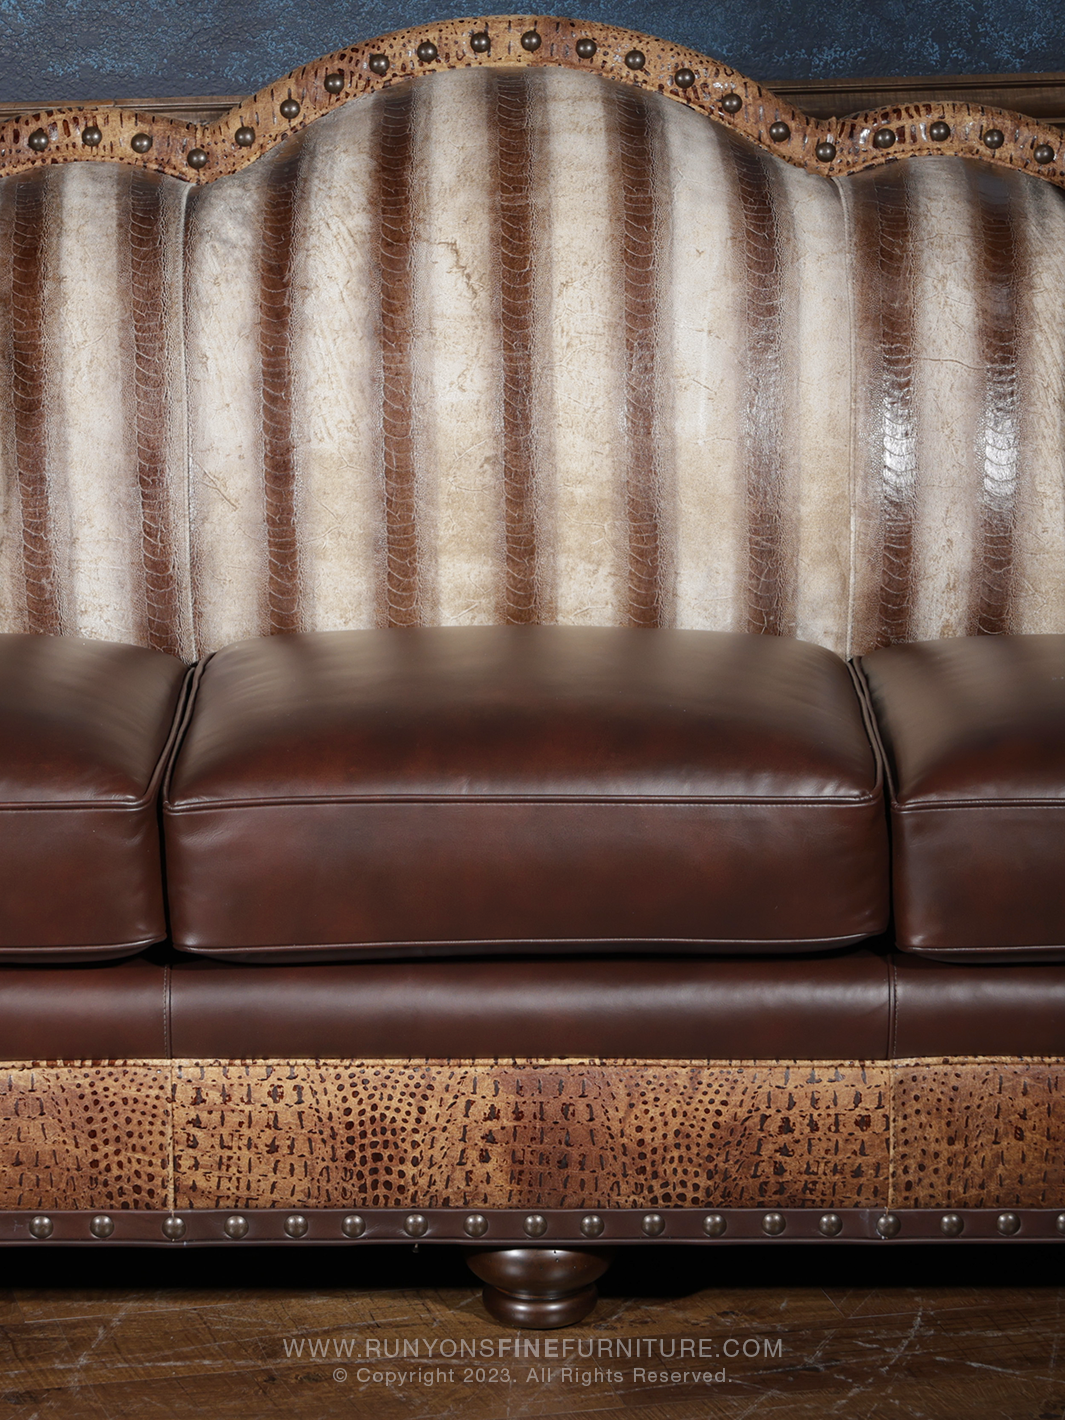 brown leather sofa close up shot